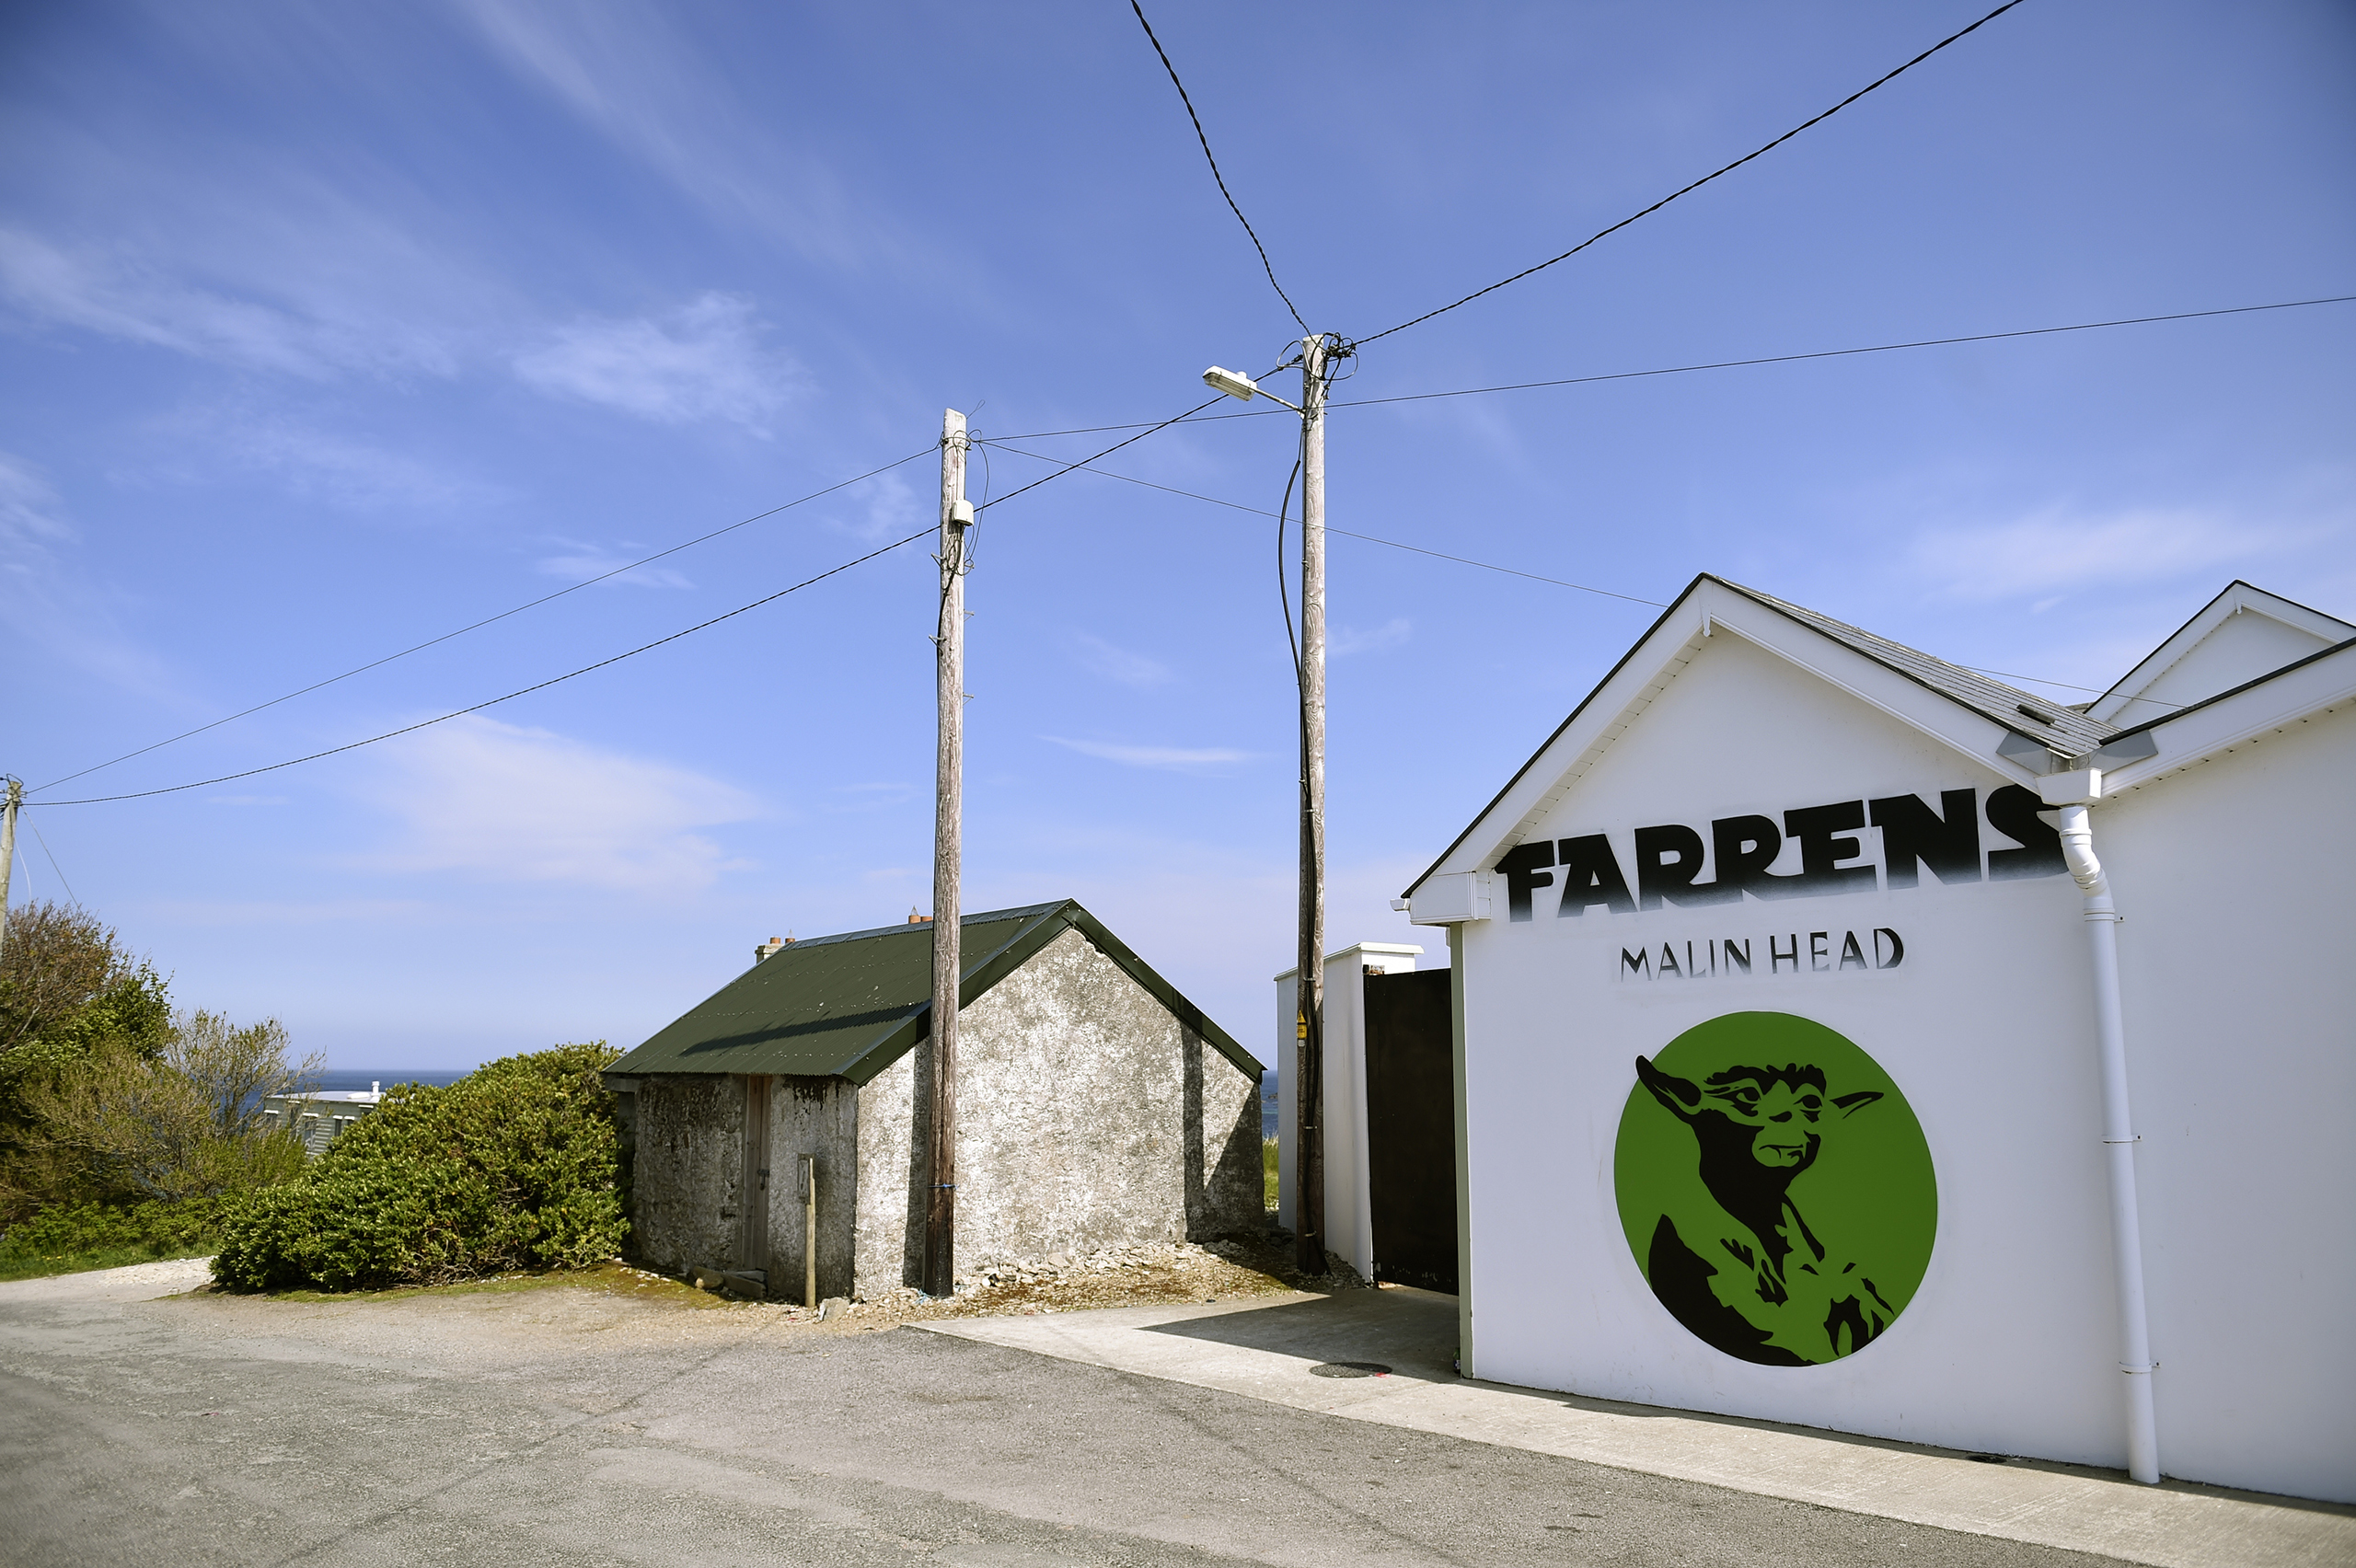 Ireland's most Northerly bar, Farrens, is seen with mural art of Star Wars character Yoda at Malin Head in Ireland on May 11, 2016. (Clodagh Kilcoyne—Reuters)